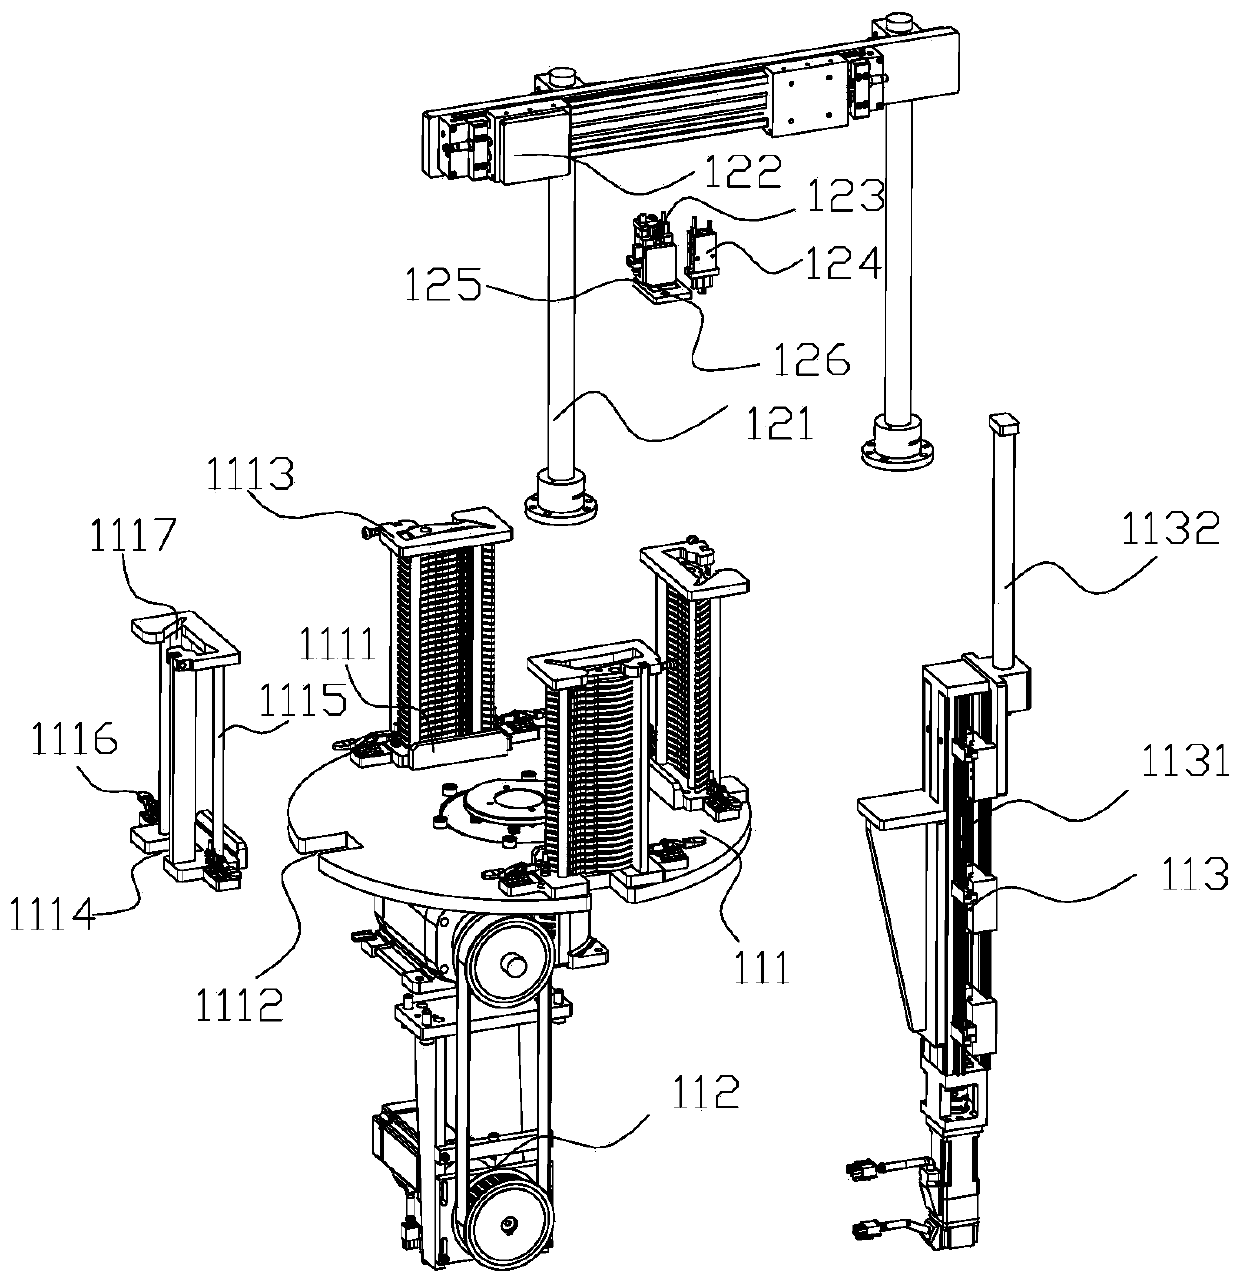 Contact deburring device and method for circuit breaker assembly